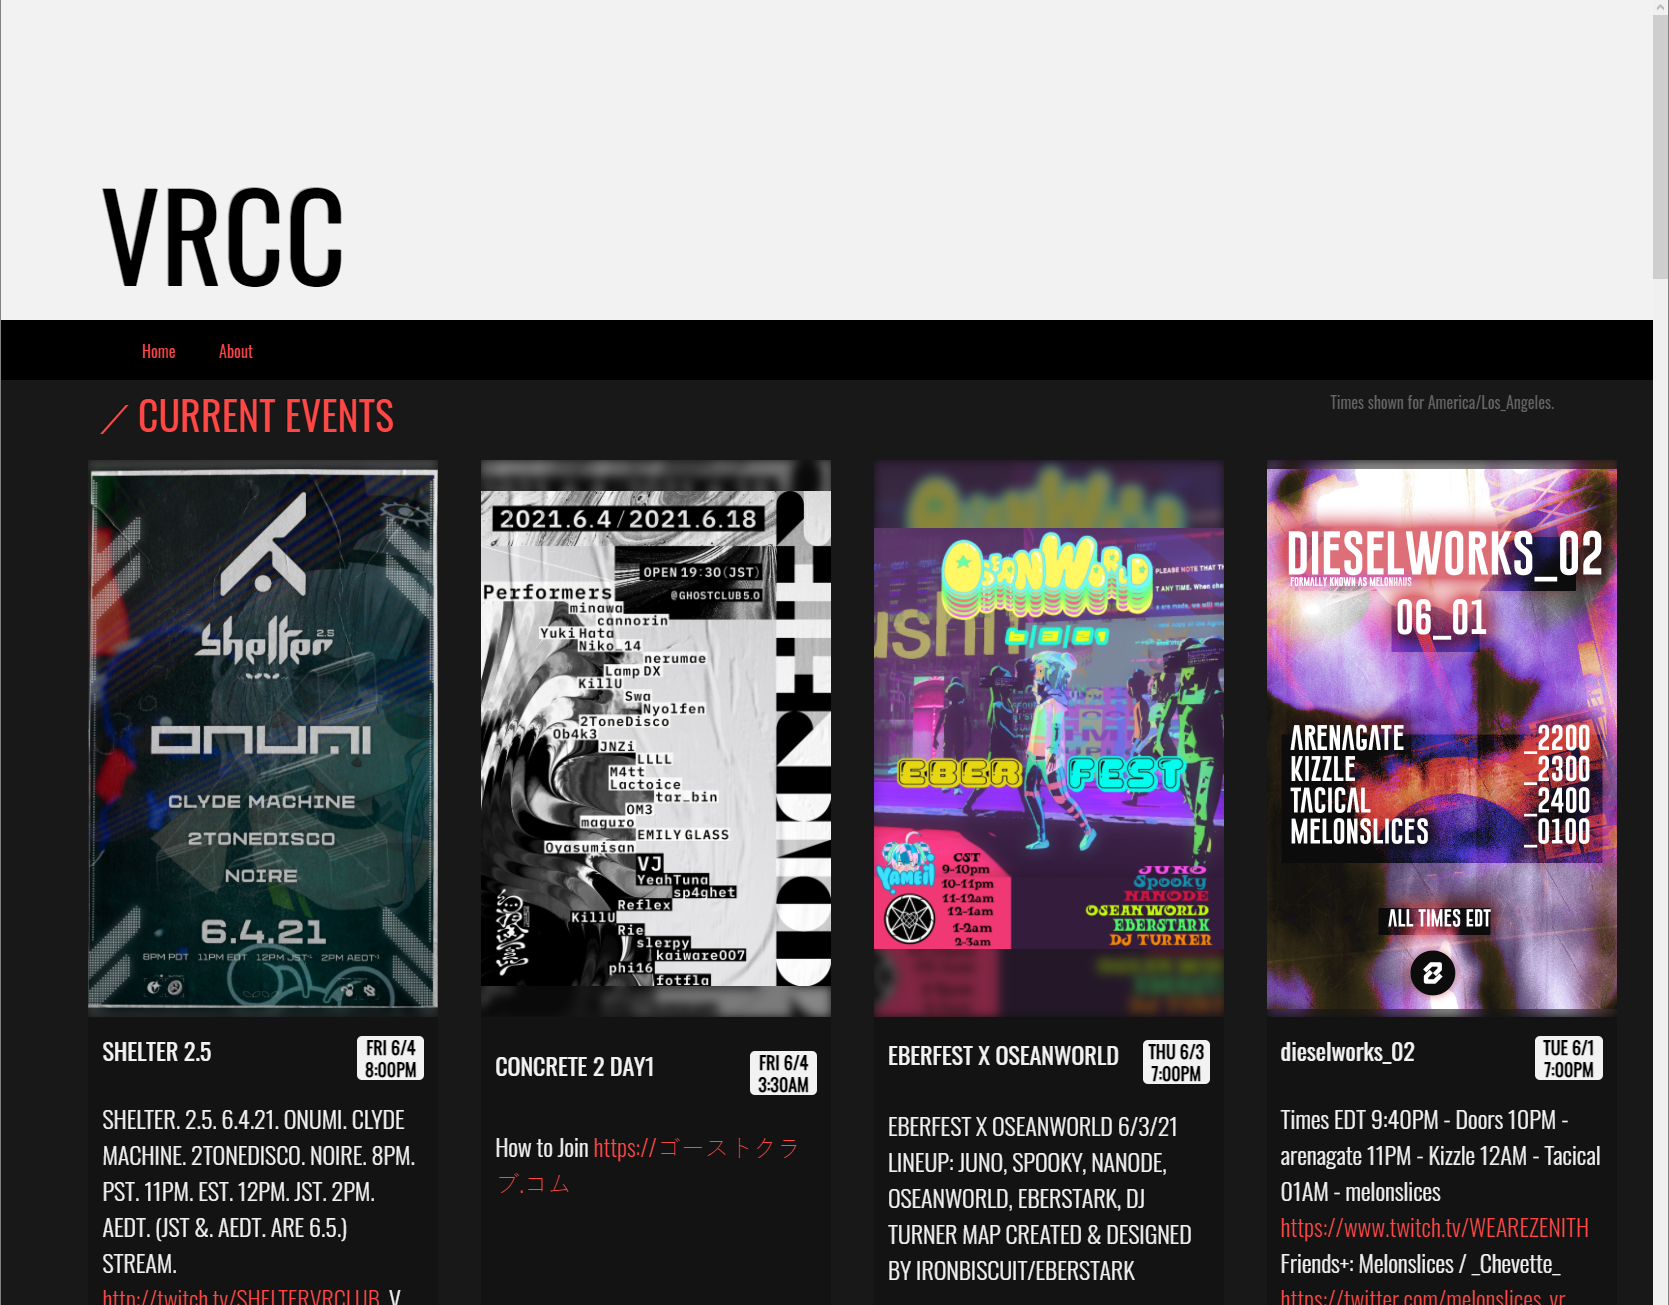 The Launch of VRCC: Your home for virtual reality music events